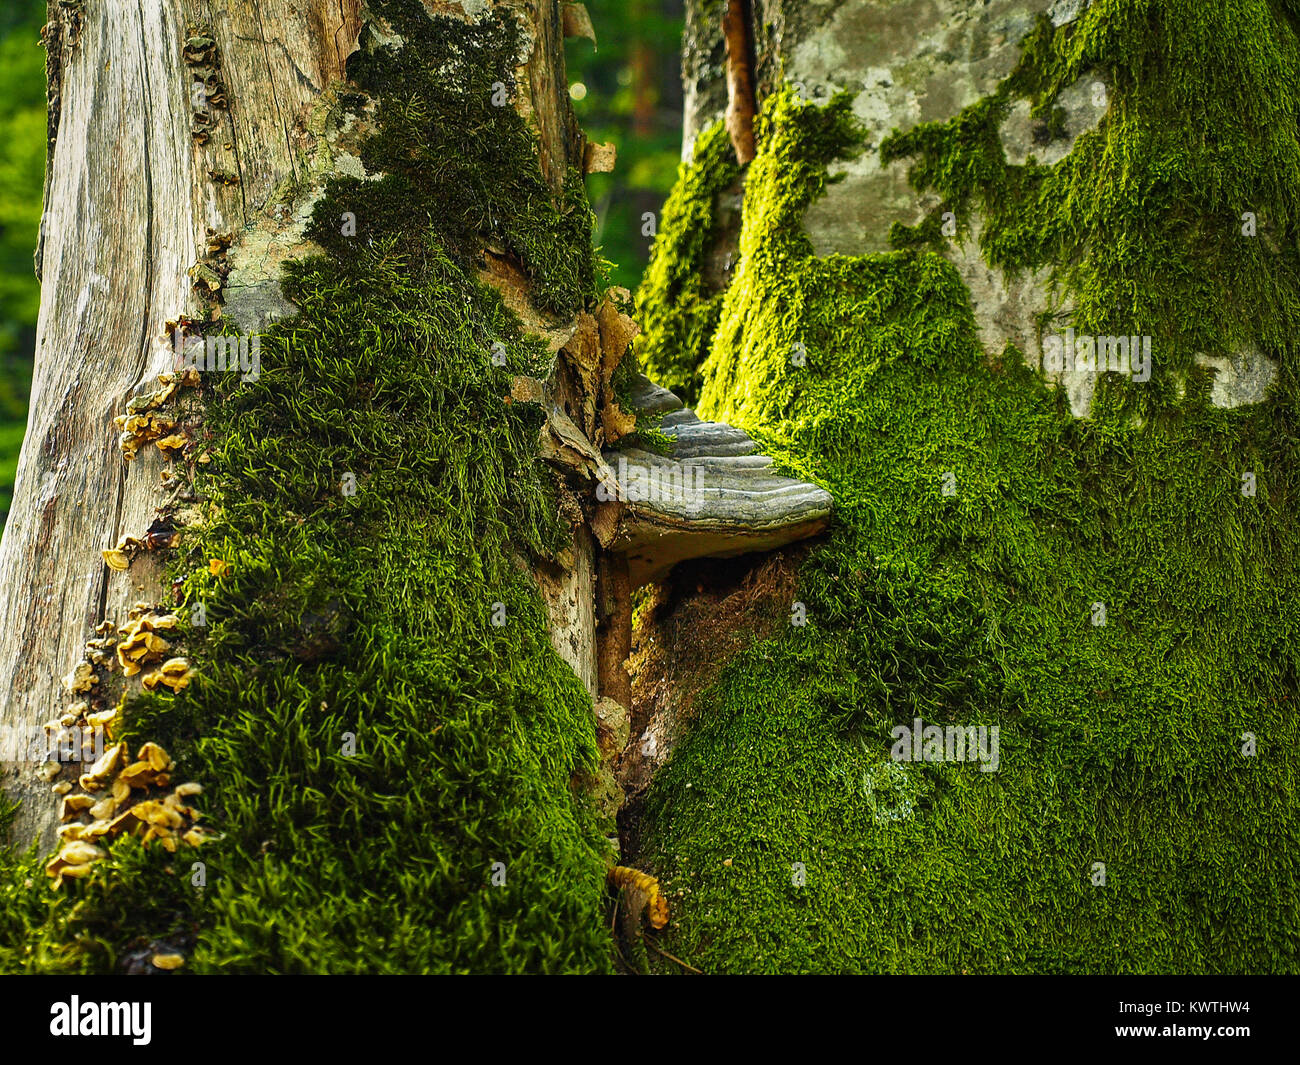 Moss and parasite fungus growing on a tree Stock Photo